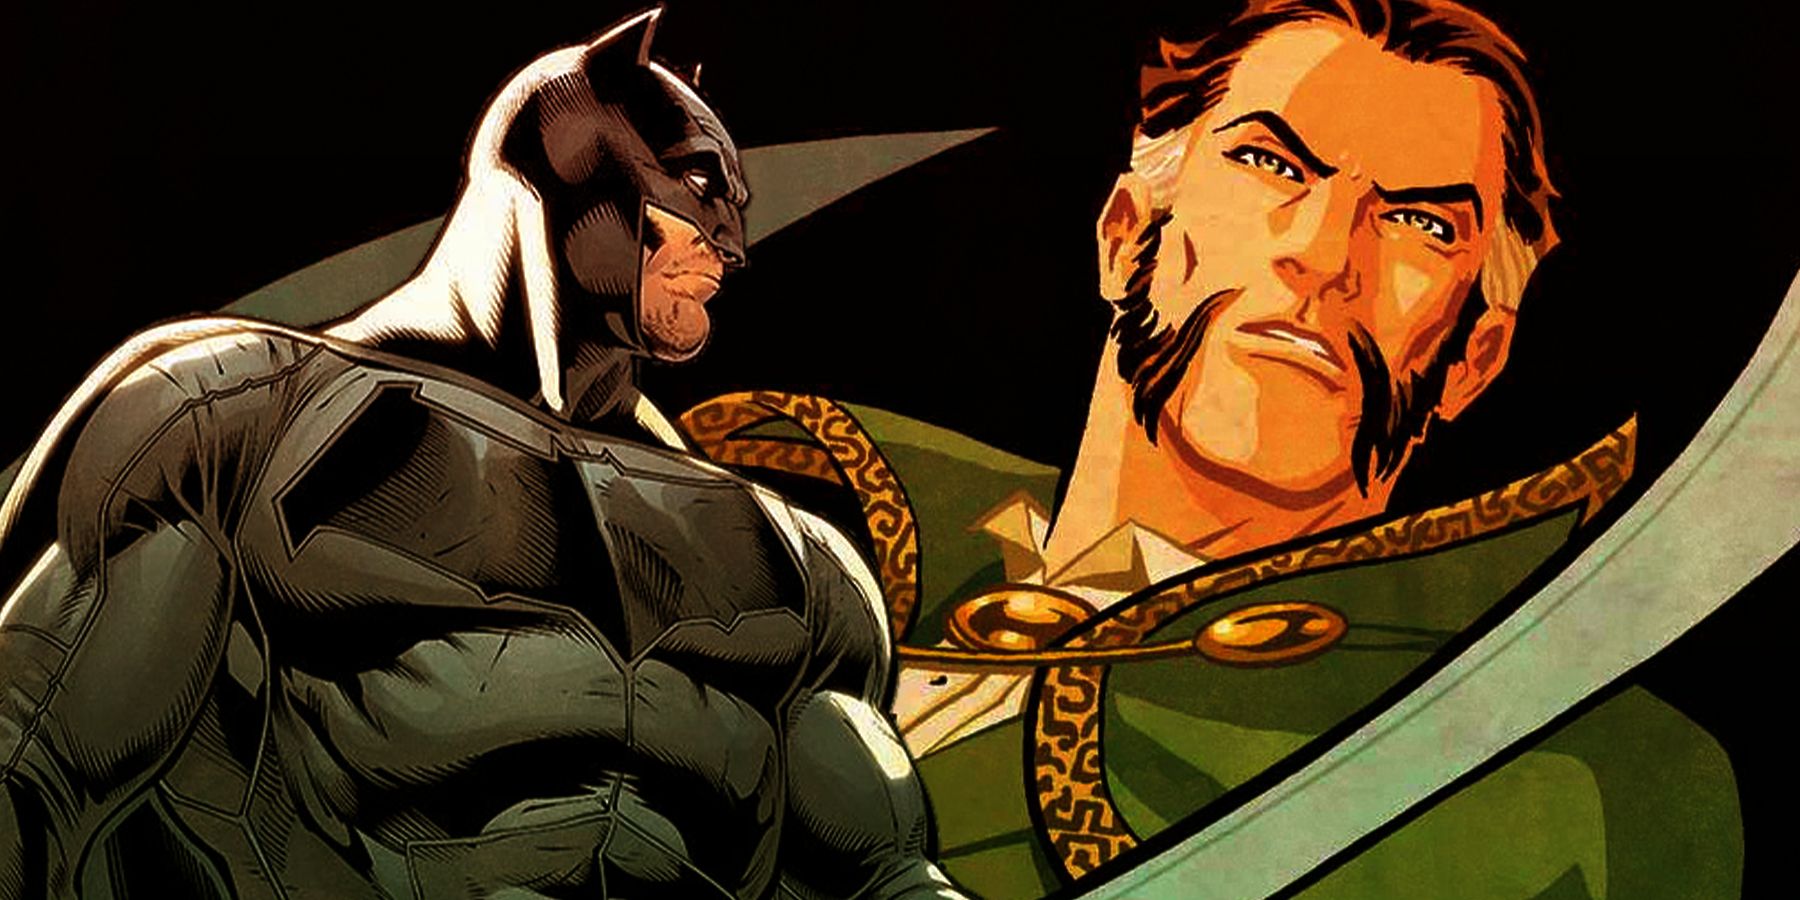 Batman looks on at Ra's Al Ghul in the background wielding a sword. 